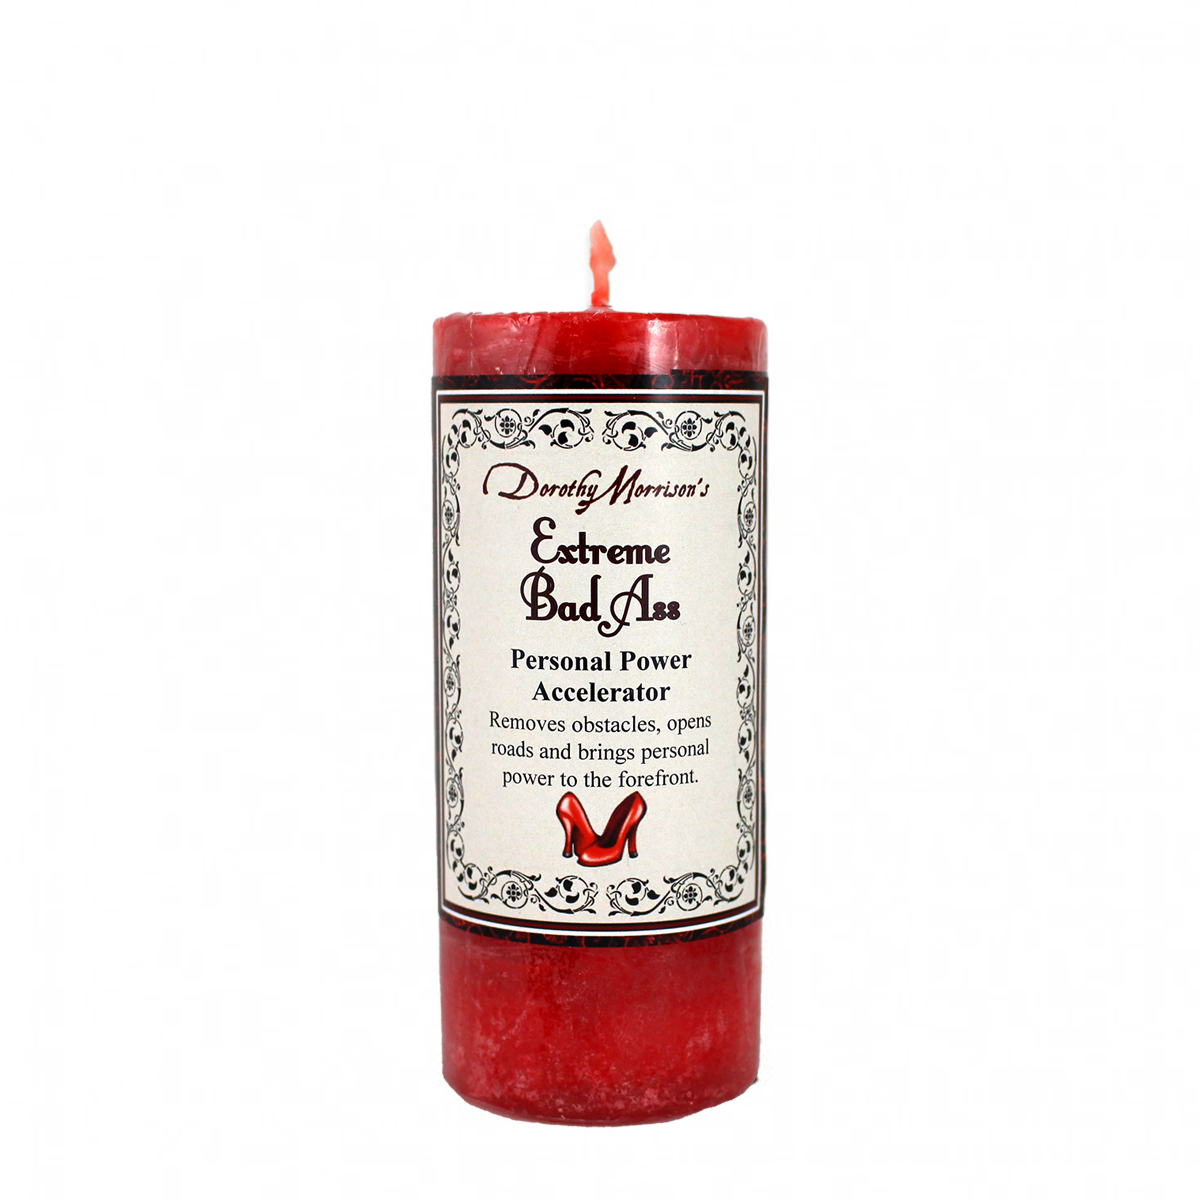 Dorothy Morrison's Extreme Badass limited edition candle - Personal Power Accelerator